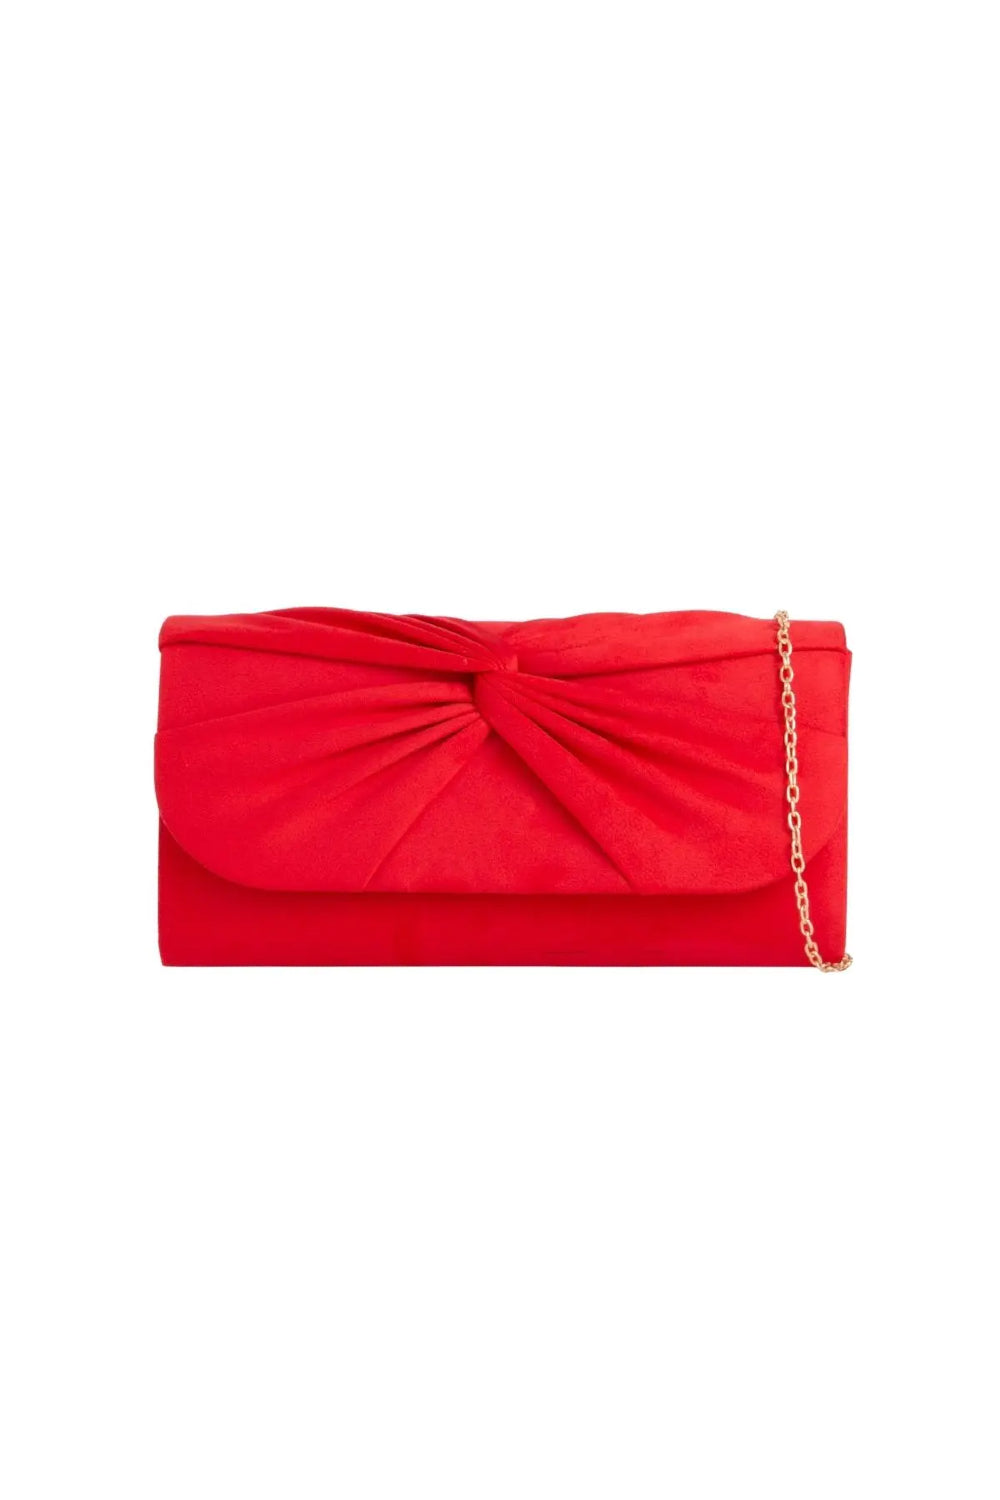 Red Suede Clutch Bag With Knot Detail ALJ2724